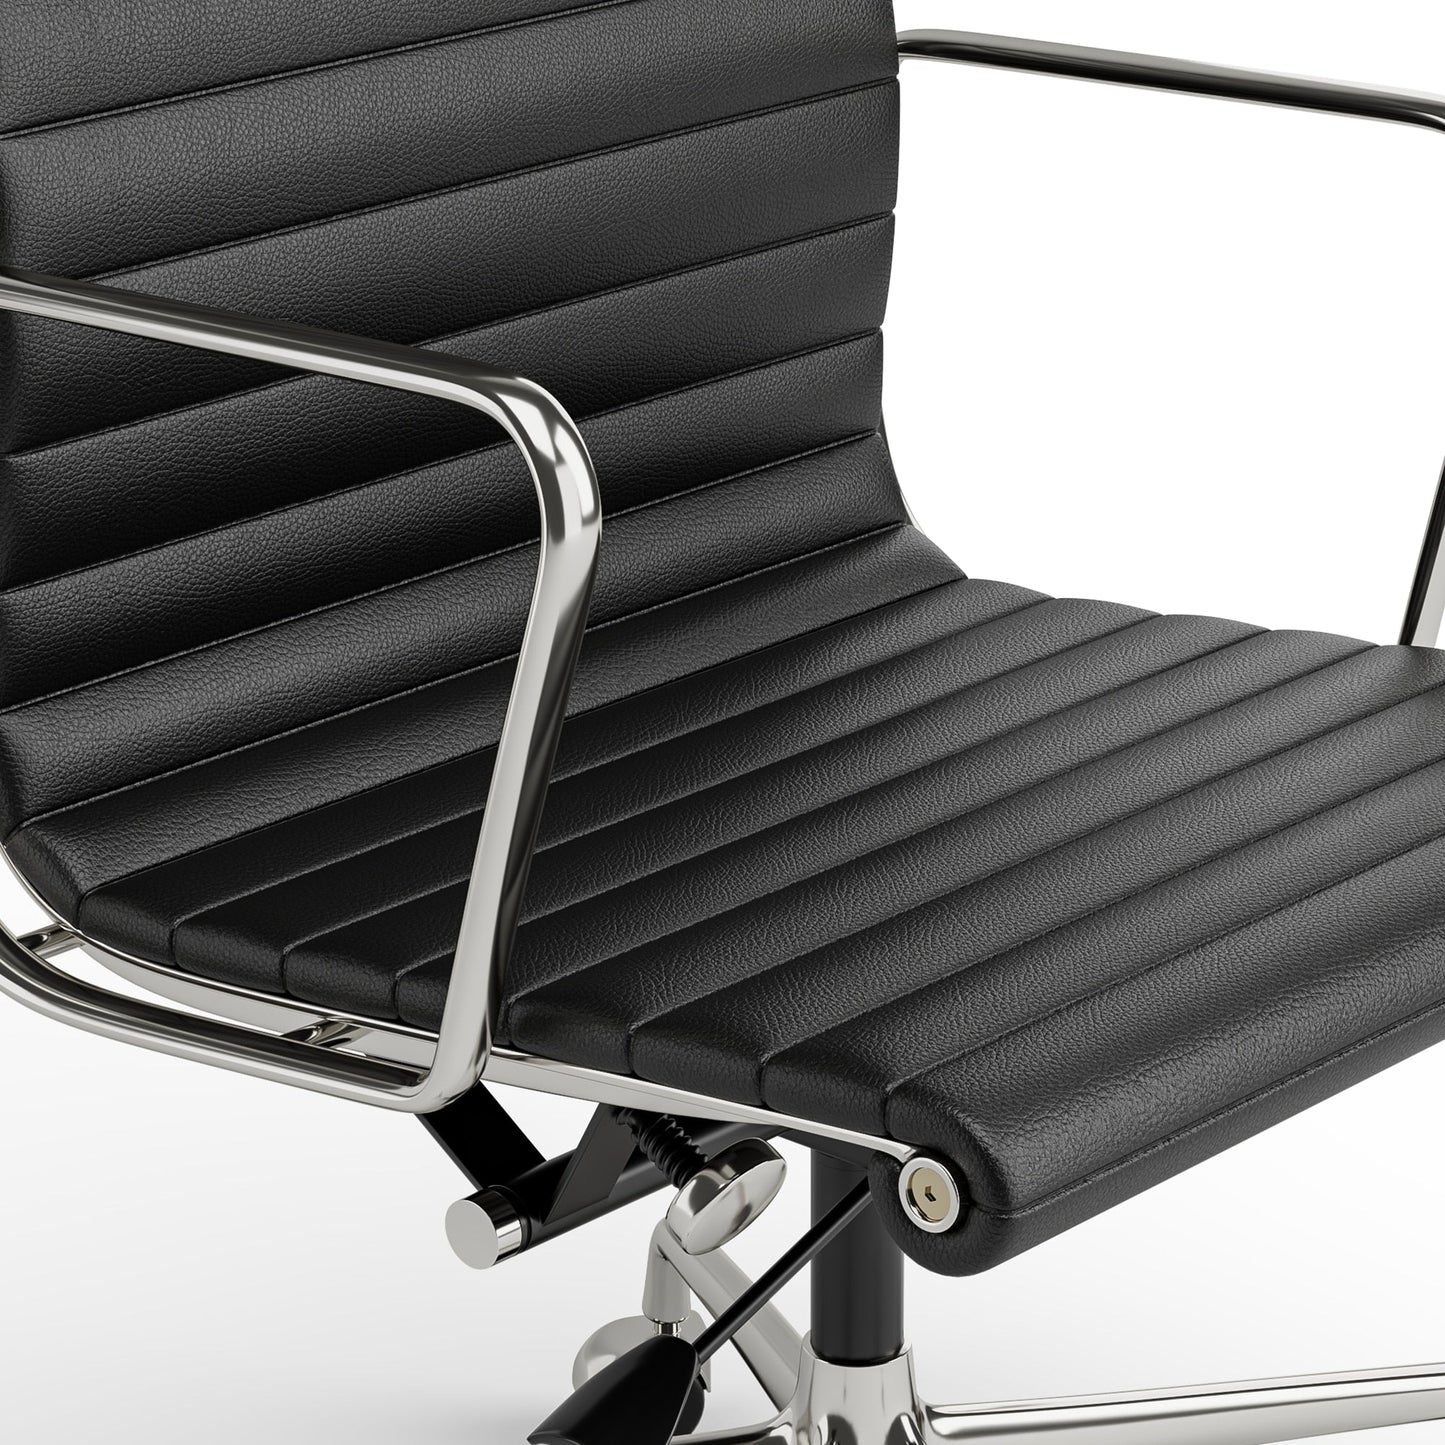 Arthia Designs - Eames Aluminum Group Office Leather Chair - Review